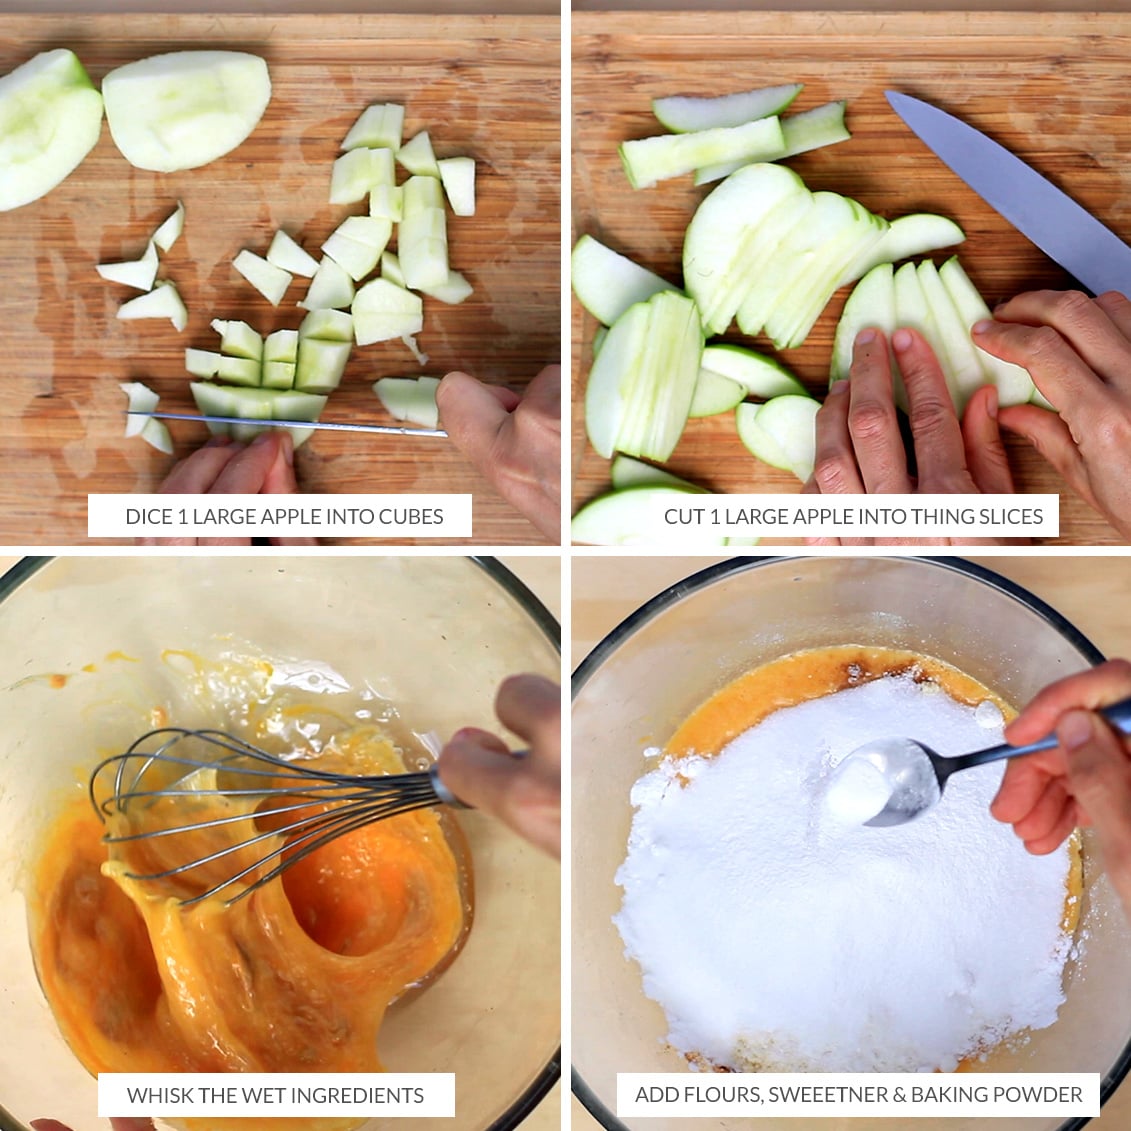 How to prepare apples and batter for the baked apple slice